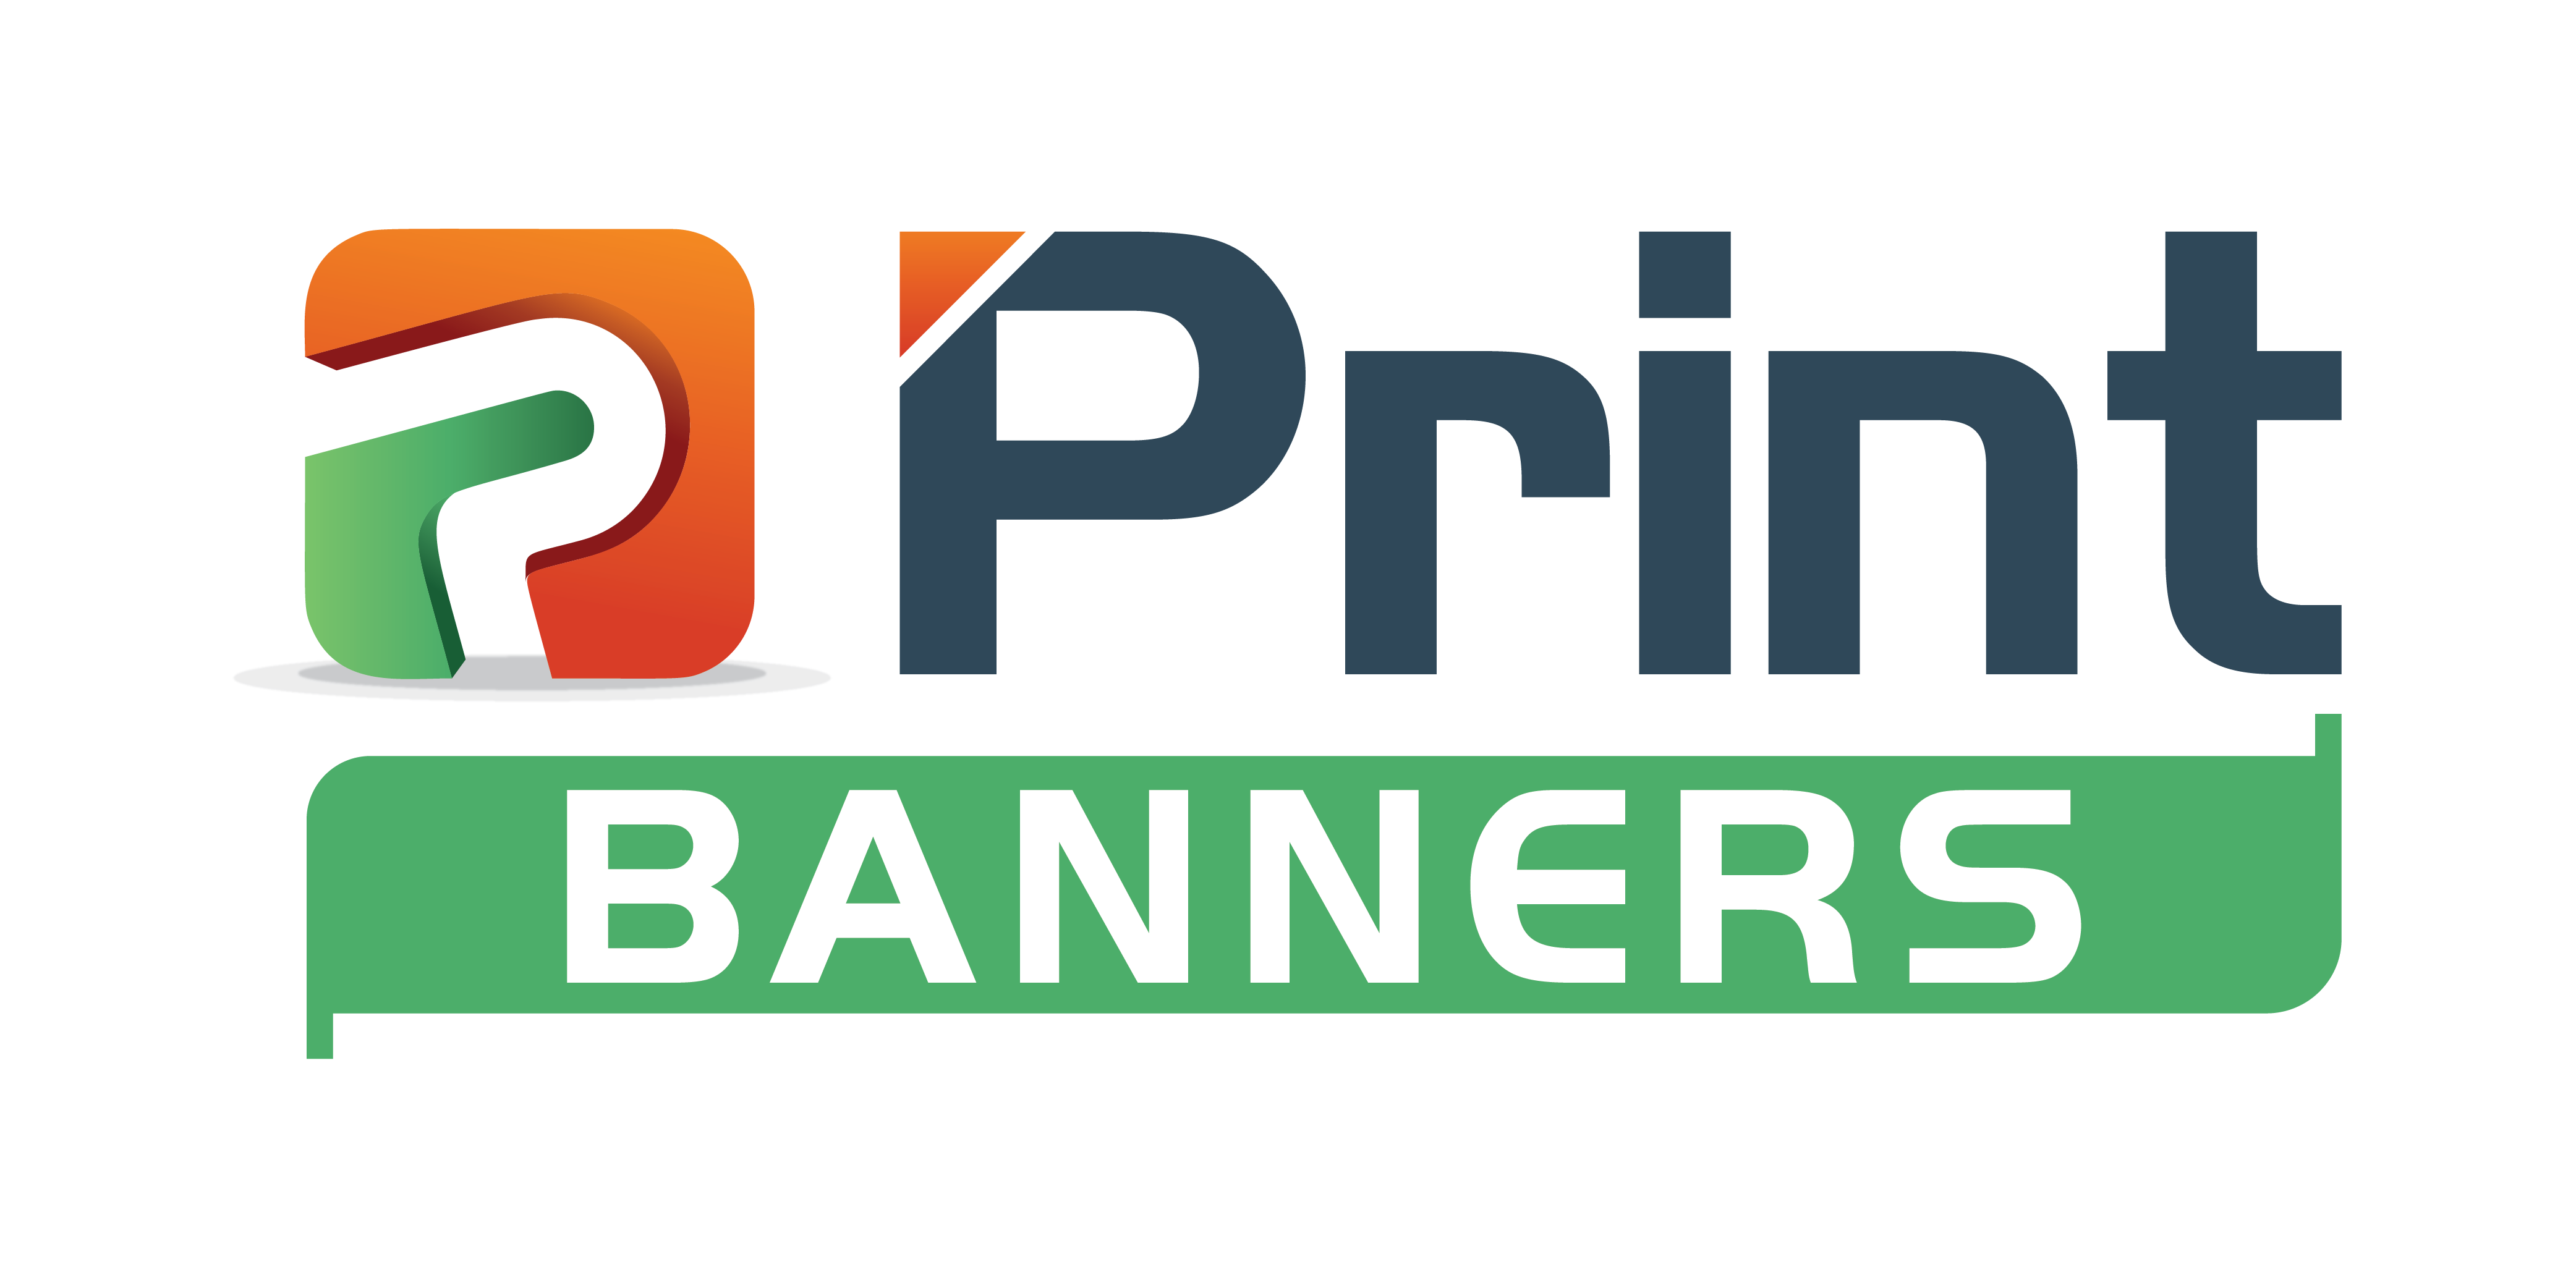 Large Format Mesh Banners,  Mesh Banner Printing,  Outdoor Mesh Advertising Banners, Printed Double Sided Mesh Banner, Custom Mesh Vinyl Banner– Print Banners